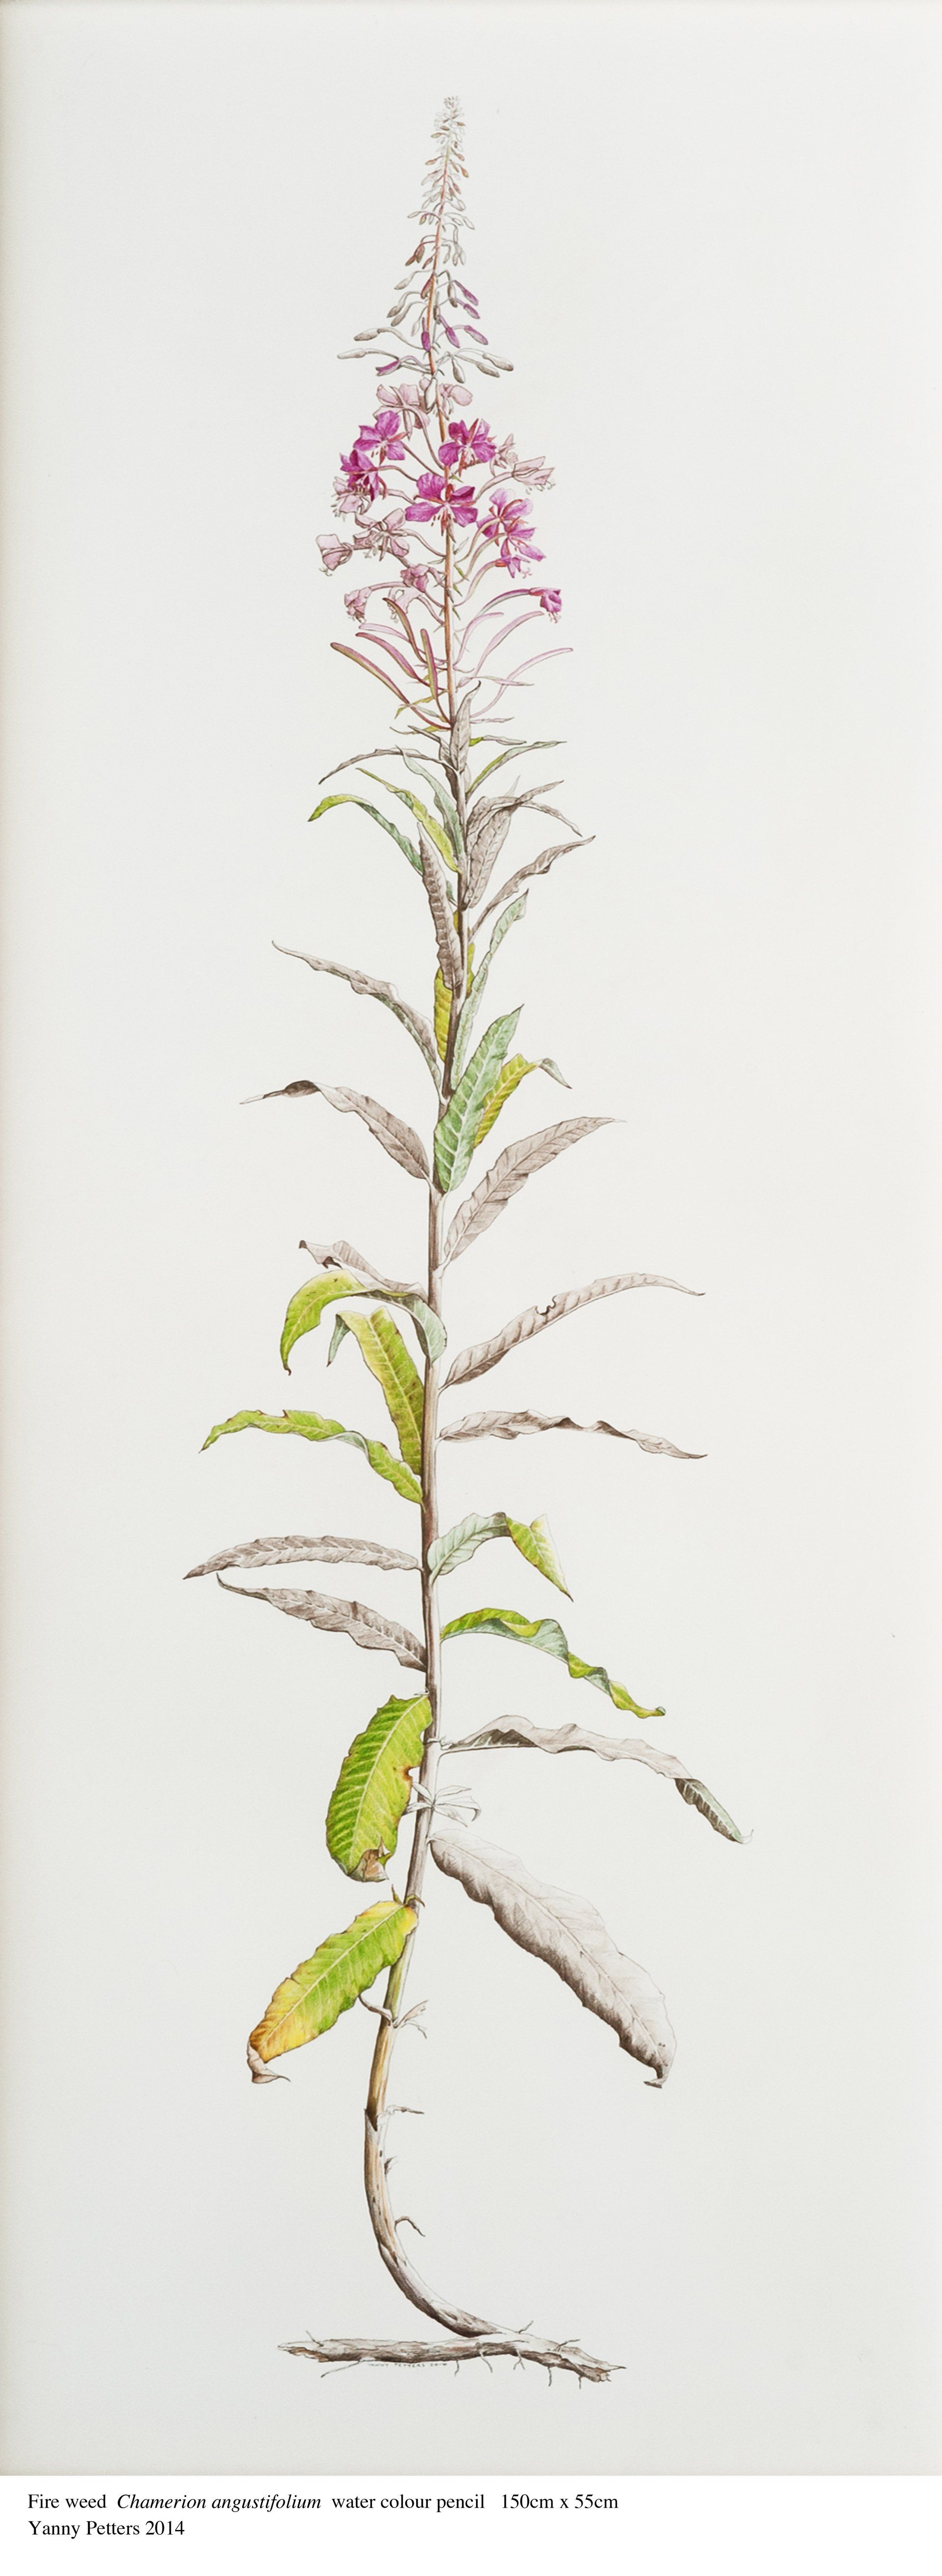 Fire Weed, a watercolour painting by Olivier Cornet Gallery artist Yanny Petters